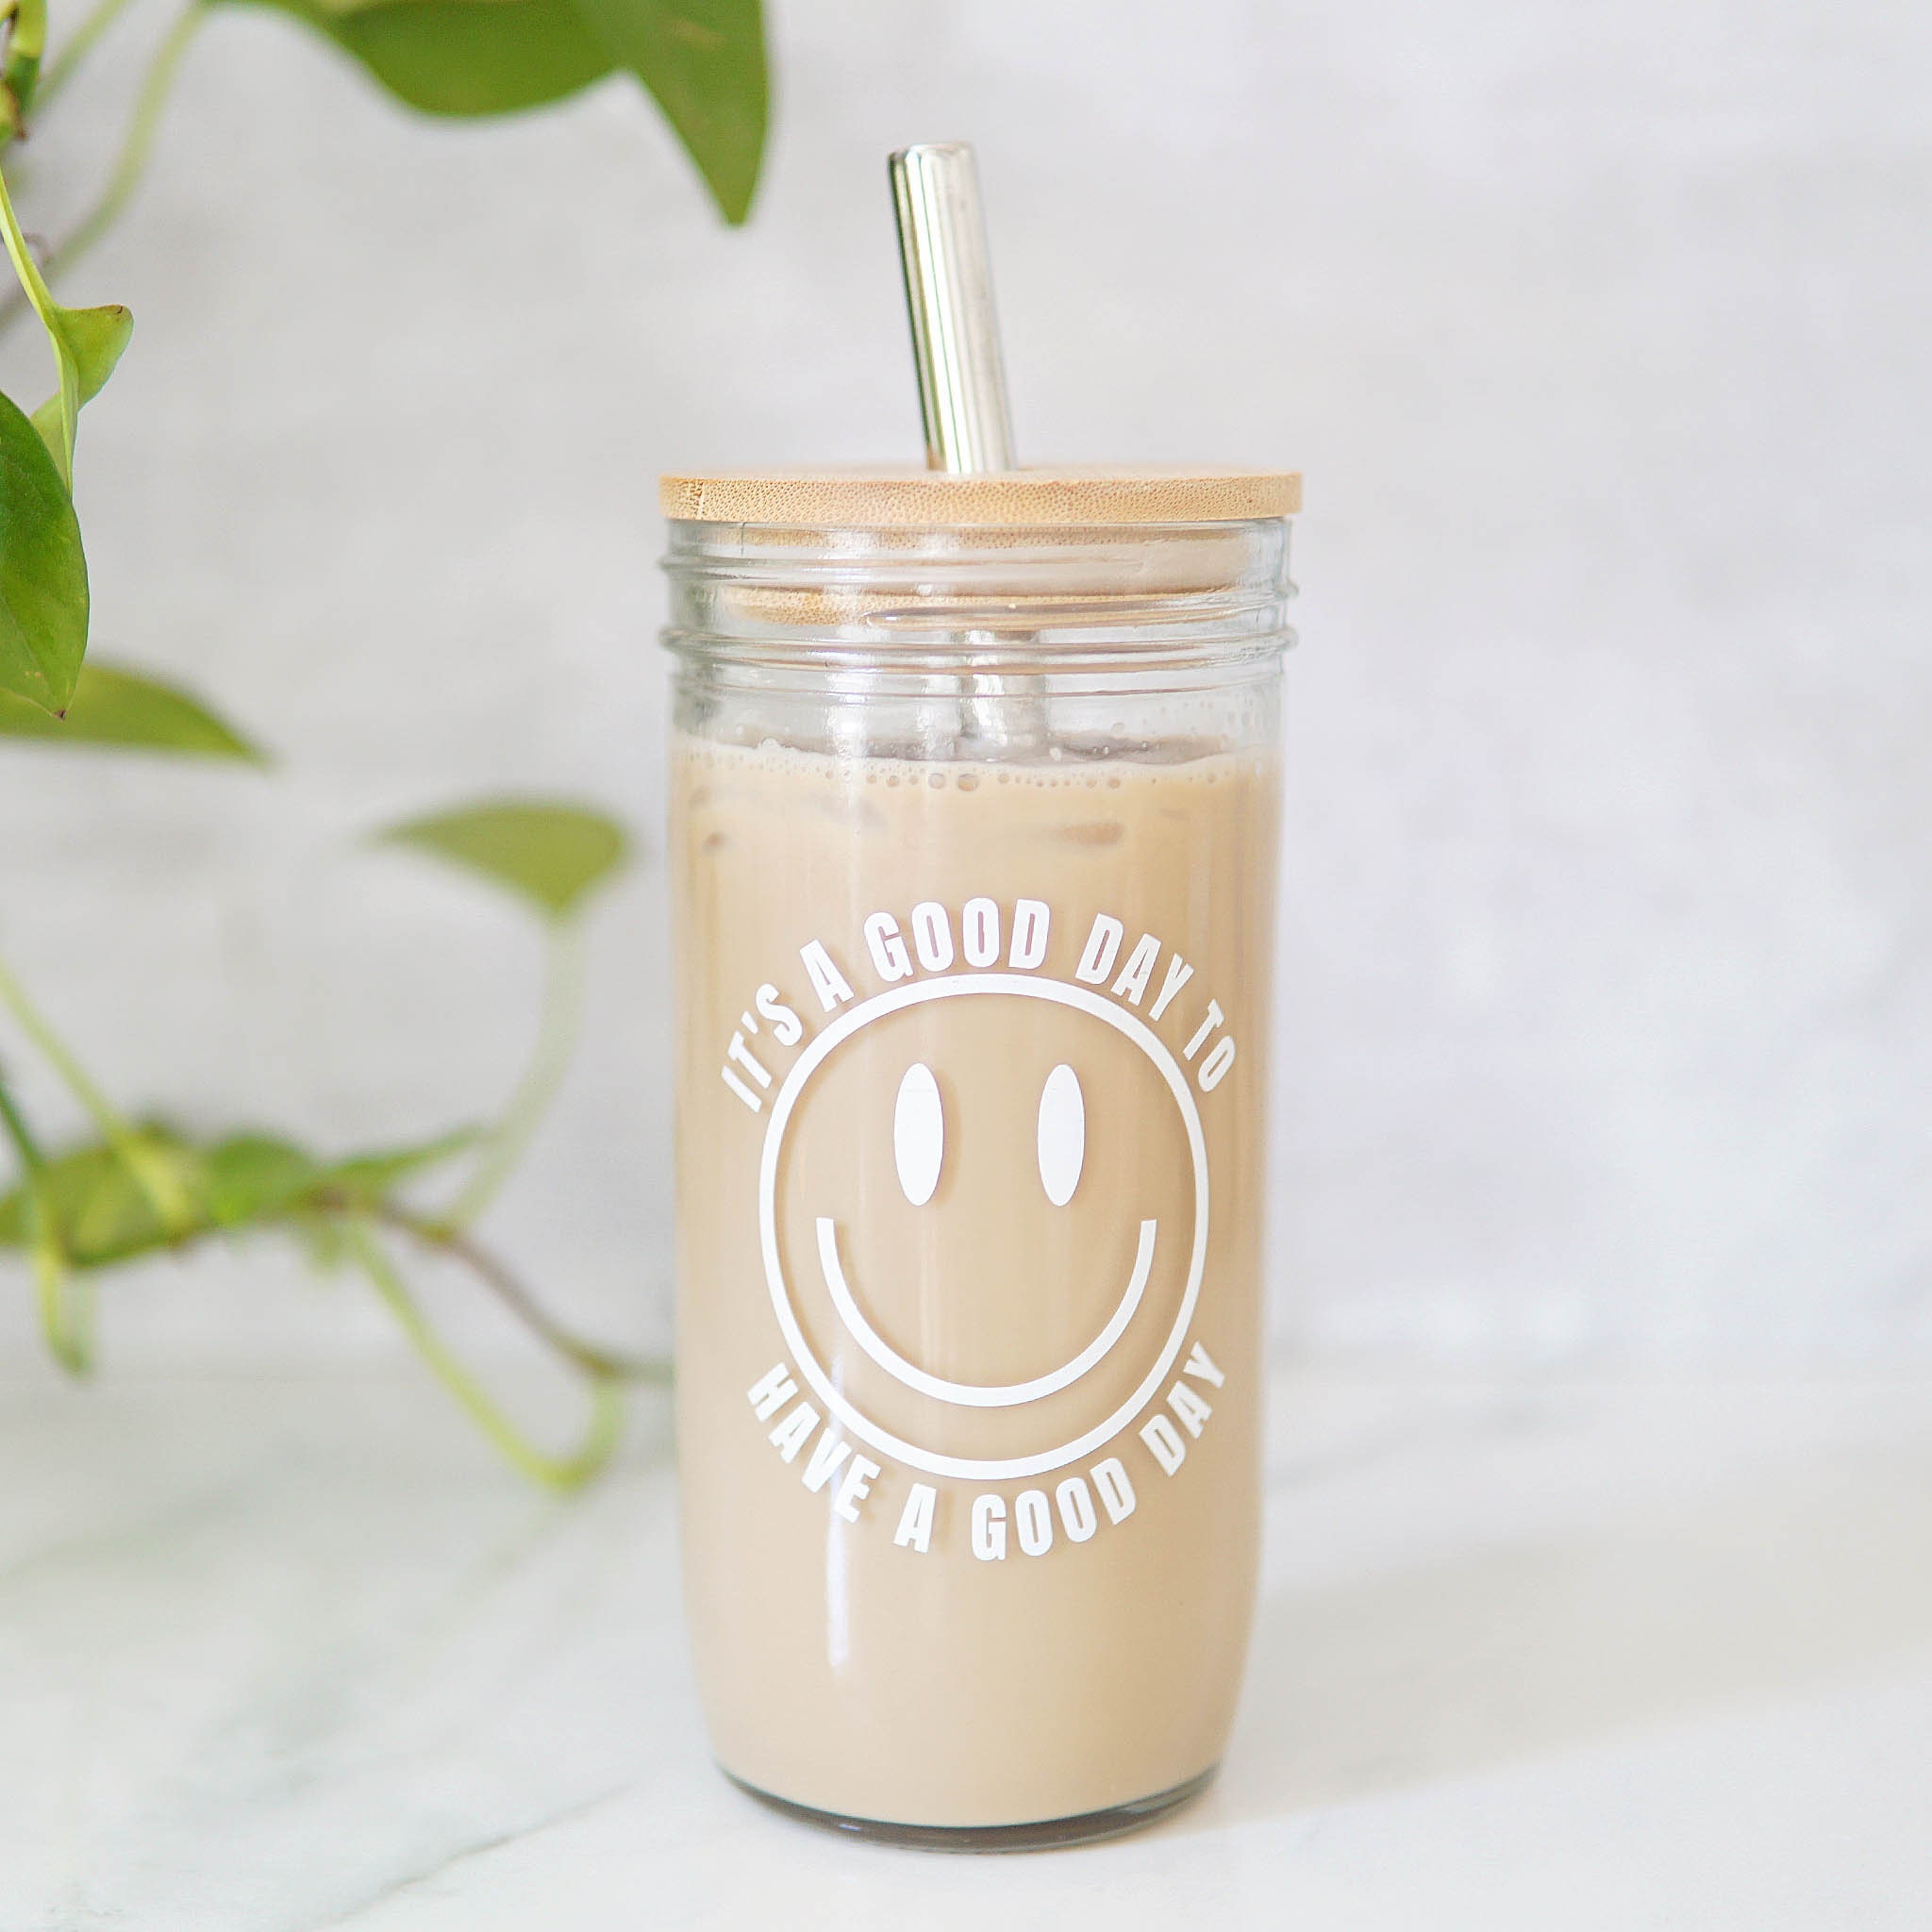 GMISUN Iced Coffee Cups with Lids, Glass Cups with Lids and Straws